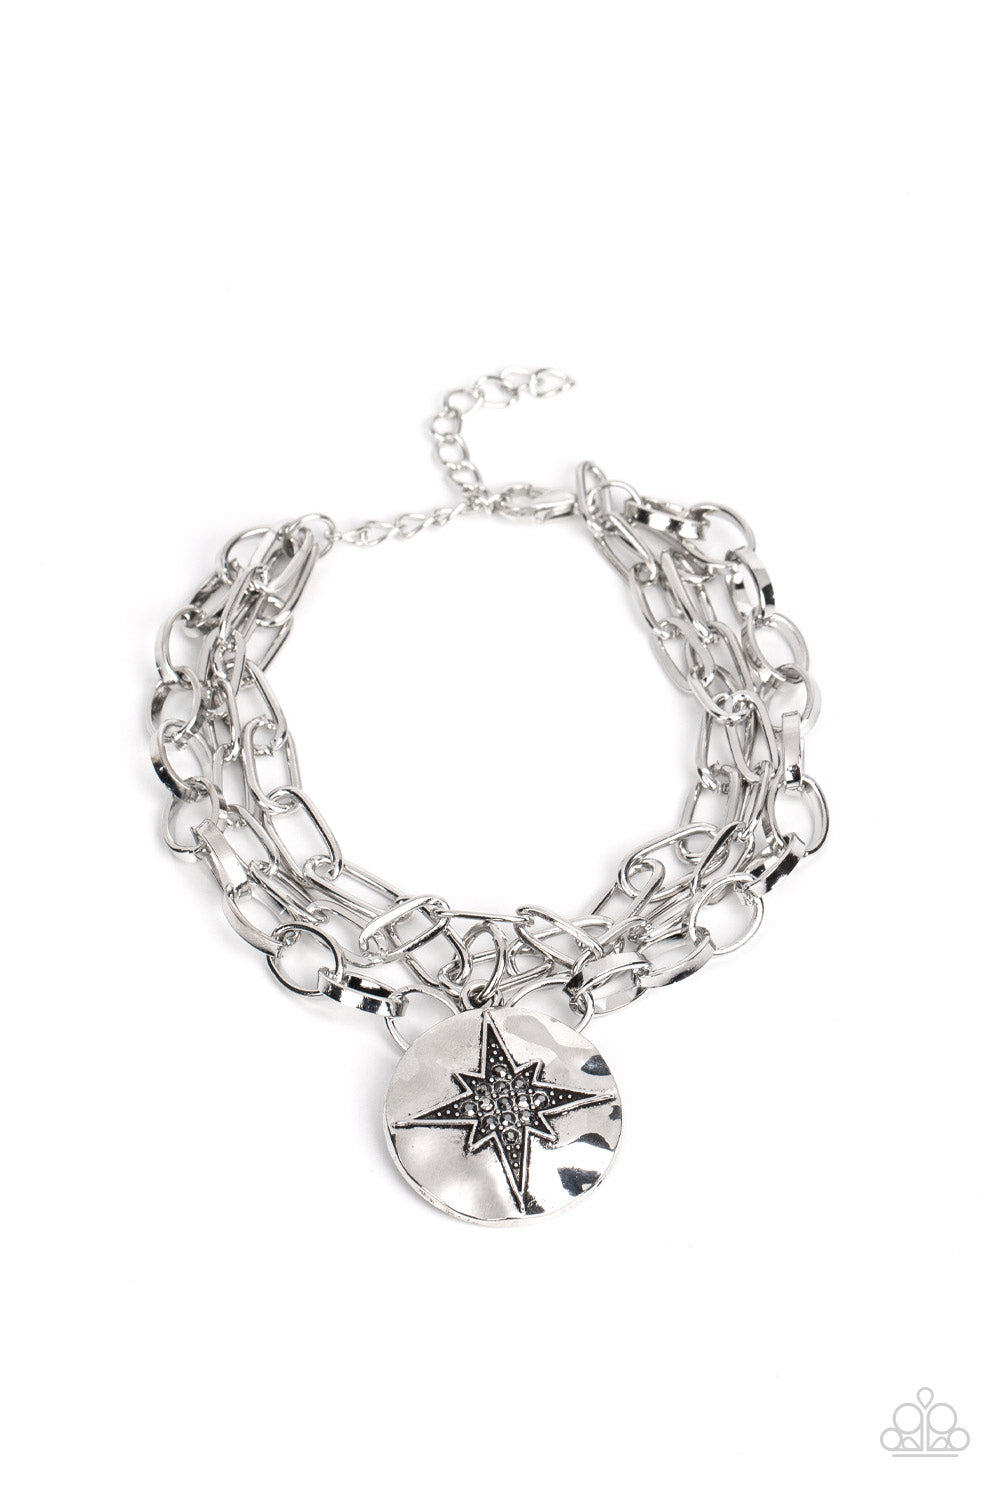 Paparazzi - True North Twinkle - Silver - Dotted with dainty hematite rhinestones, a twinkly star sparkles across the front of a hammered silver disc that delicately swings from layered silver chains around the wrist for a stellar style.